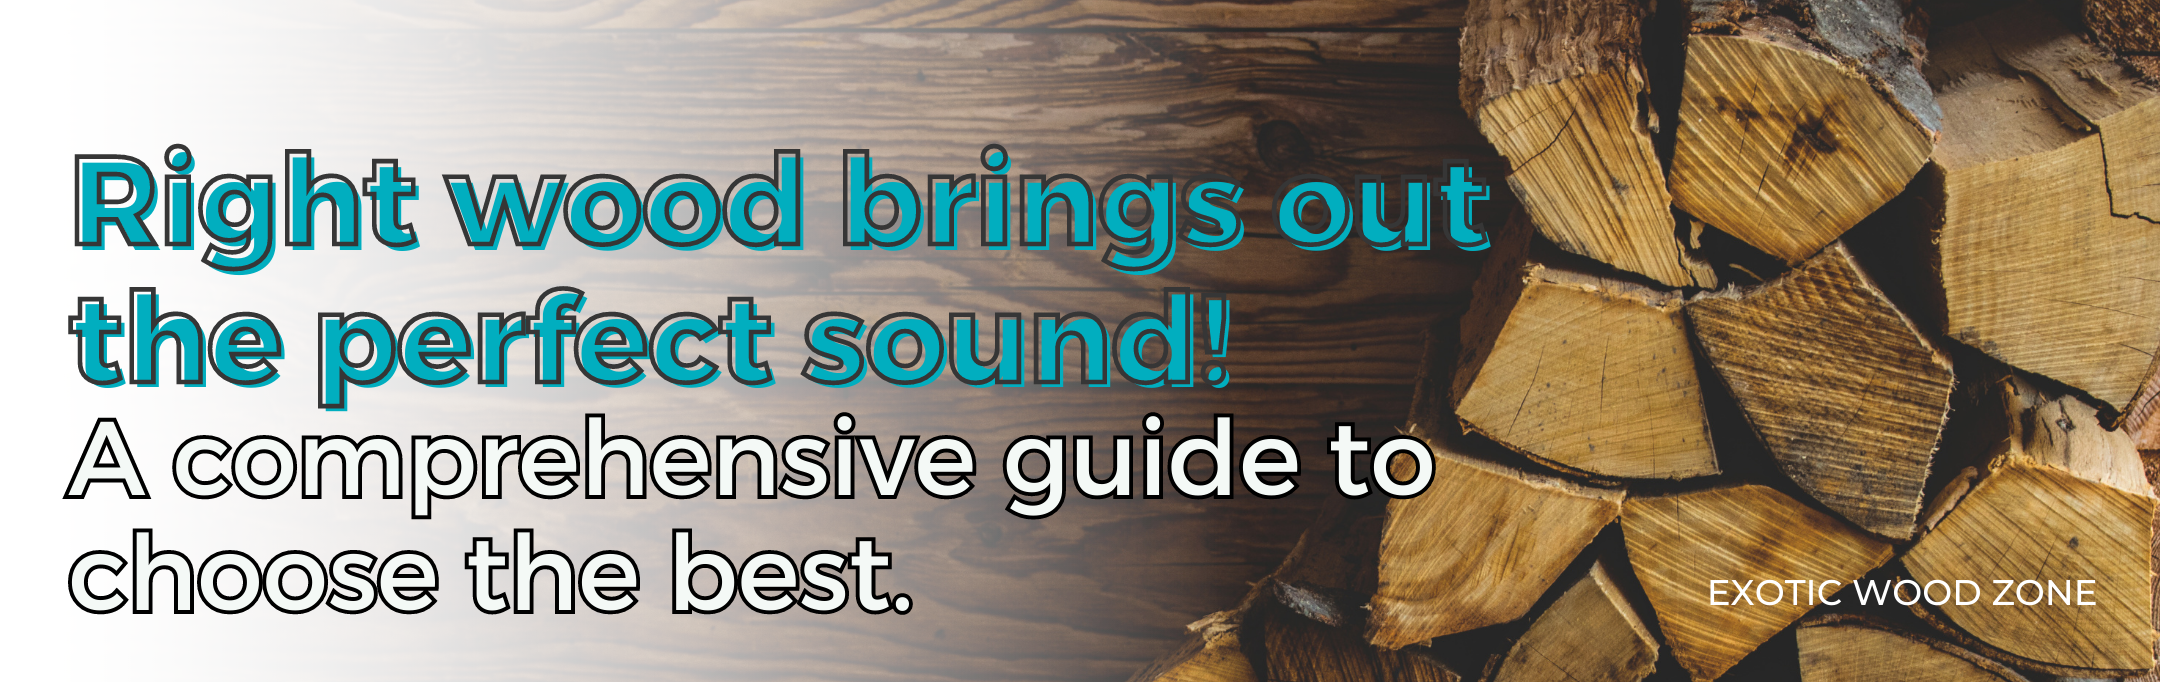 Right wood brings out the perfect sound! A comprehensive guide to choose the best.